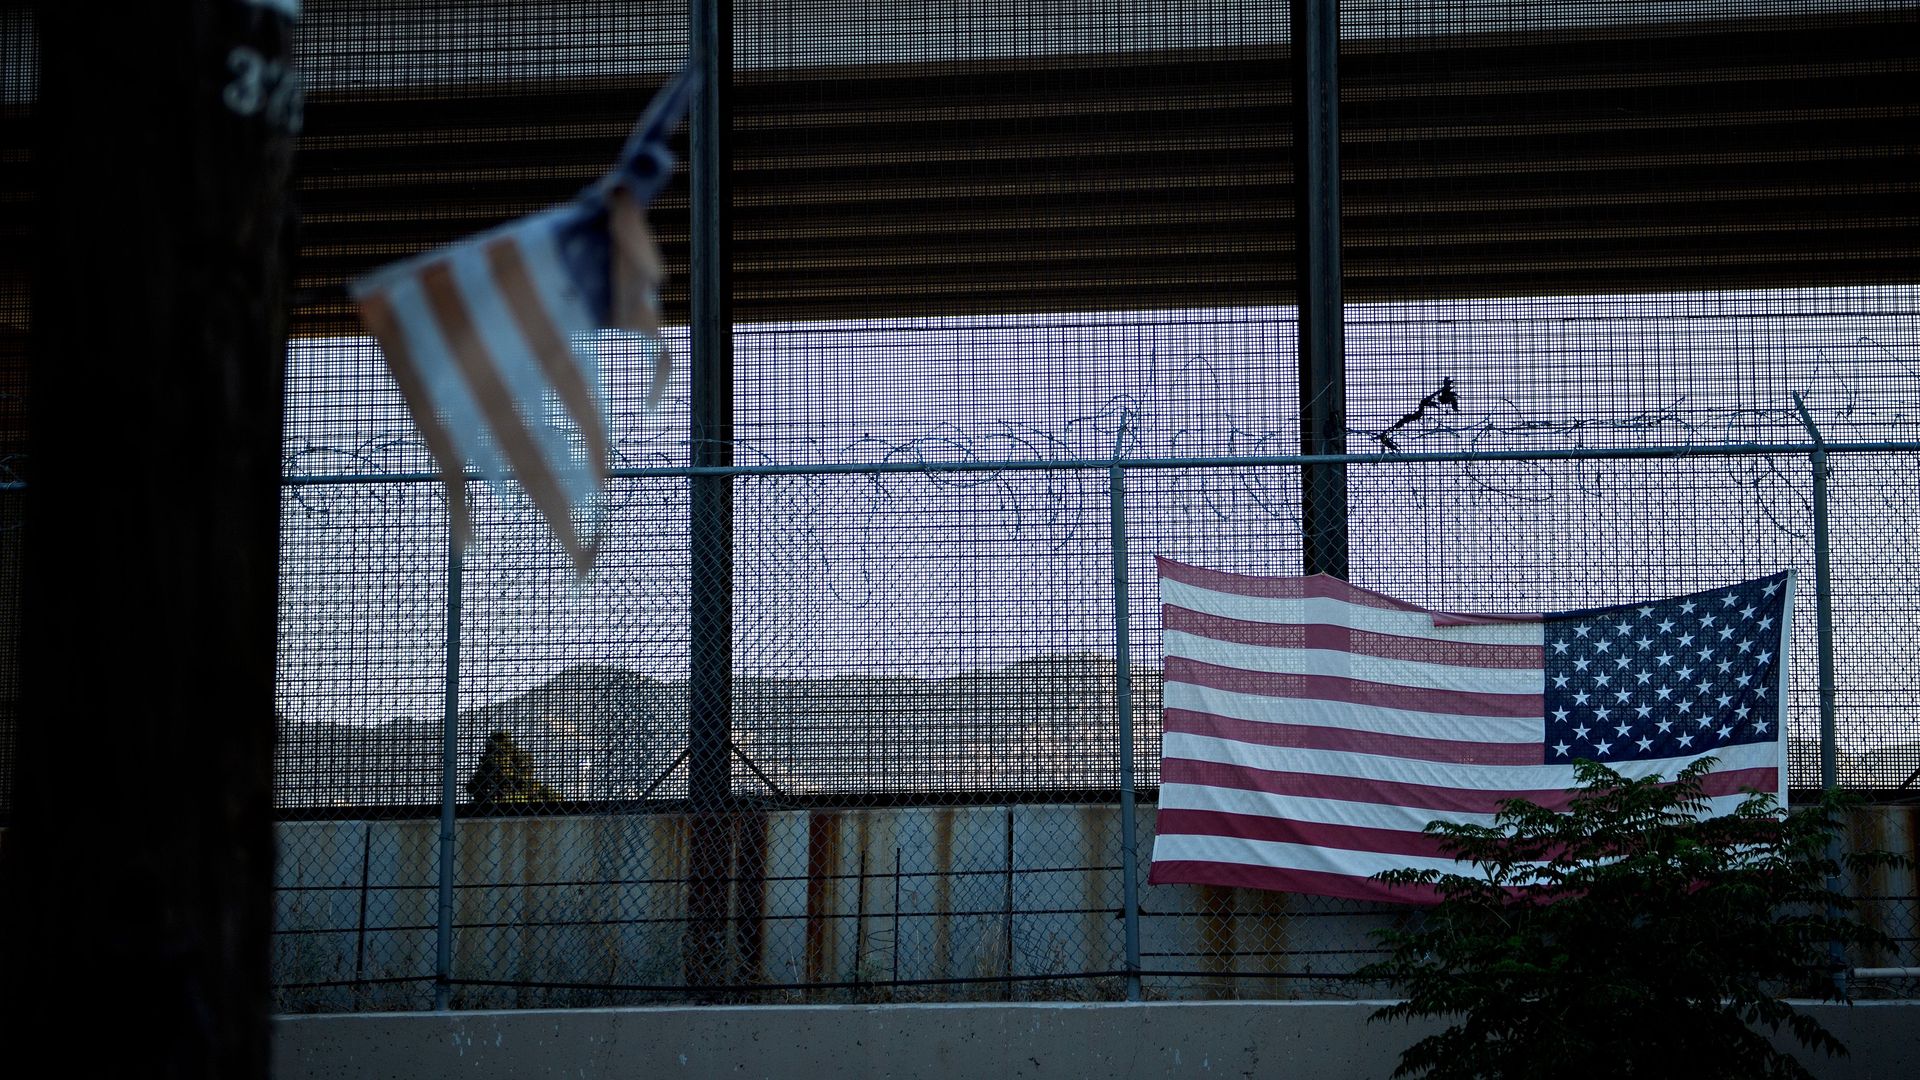 A U.S. flag hanging on a chain-link fence.